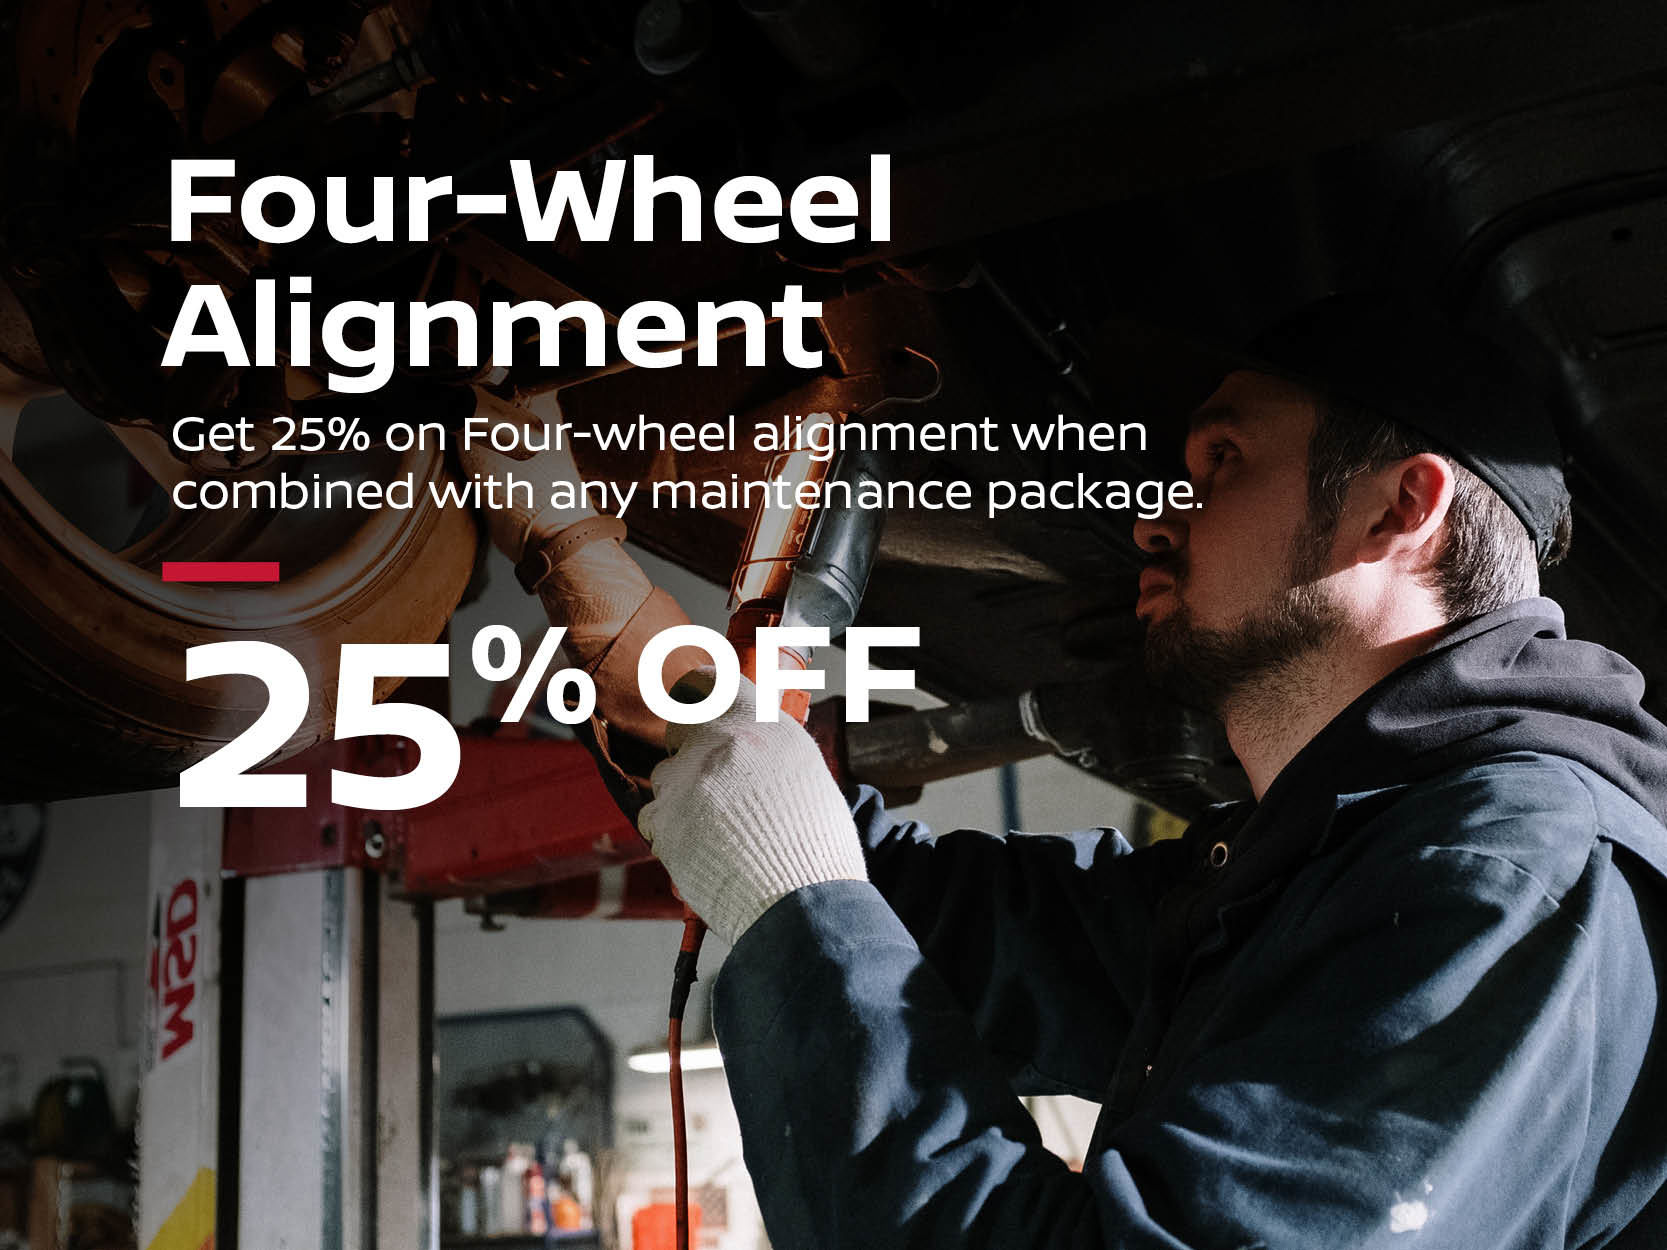 Four-Wheel Alignment Special